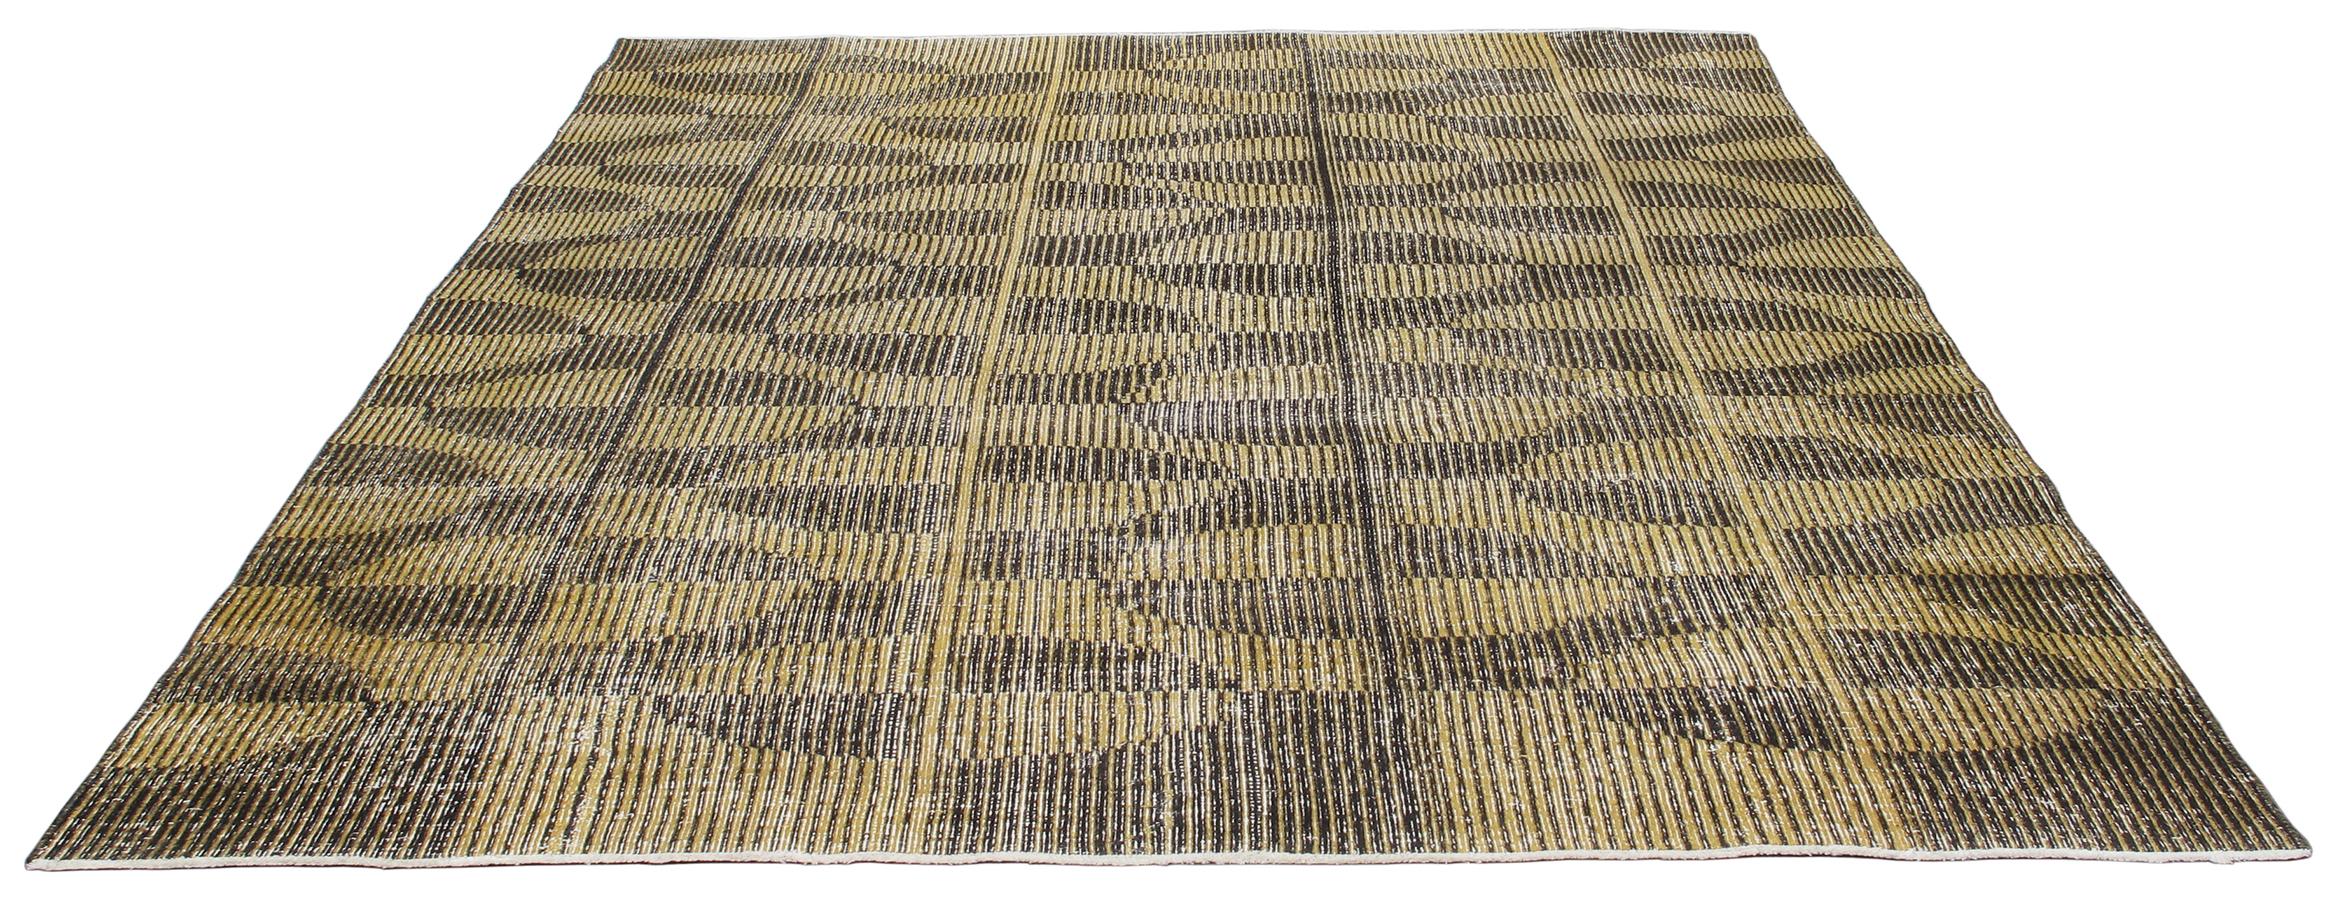 Turkish Vintage Midcentury Art Deco Bauhaus Style Rug in Black and Yellow Color